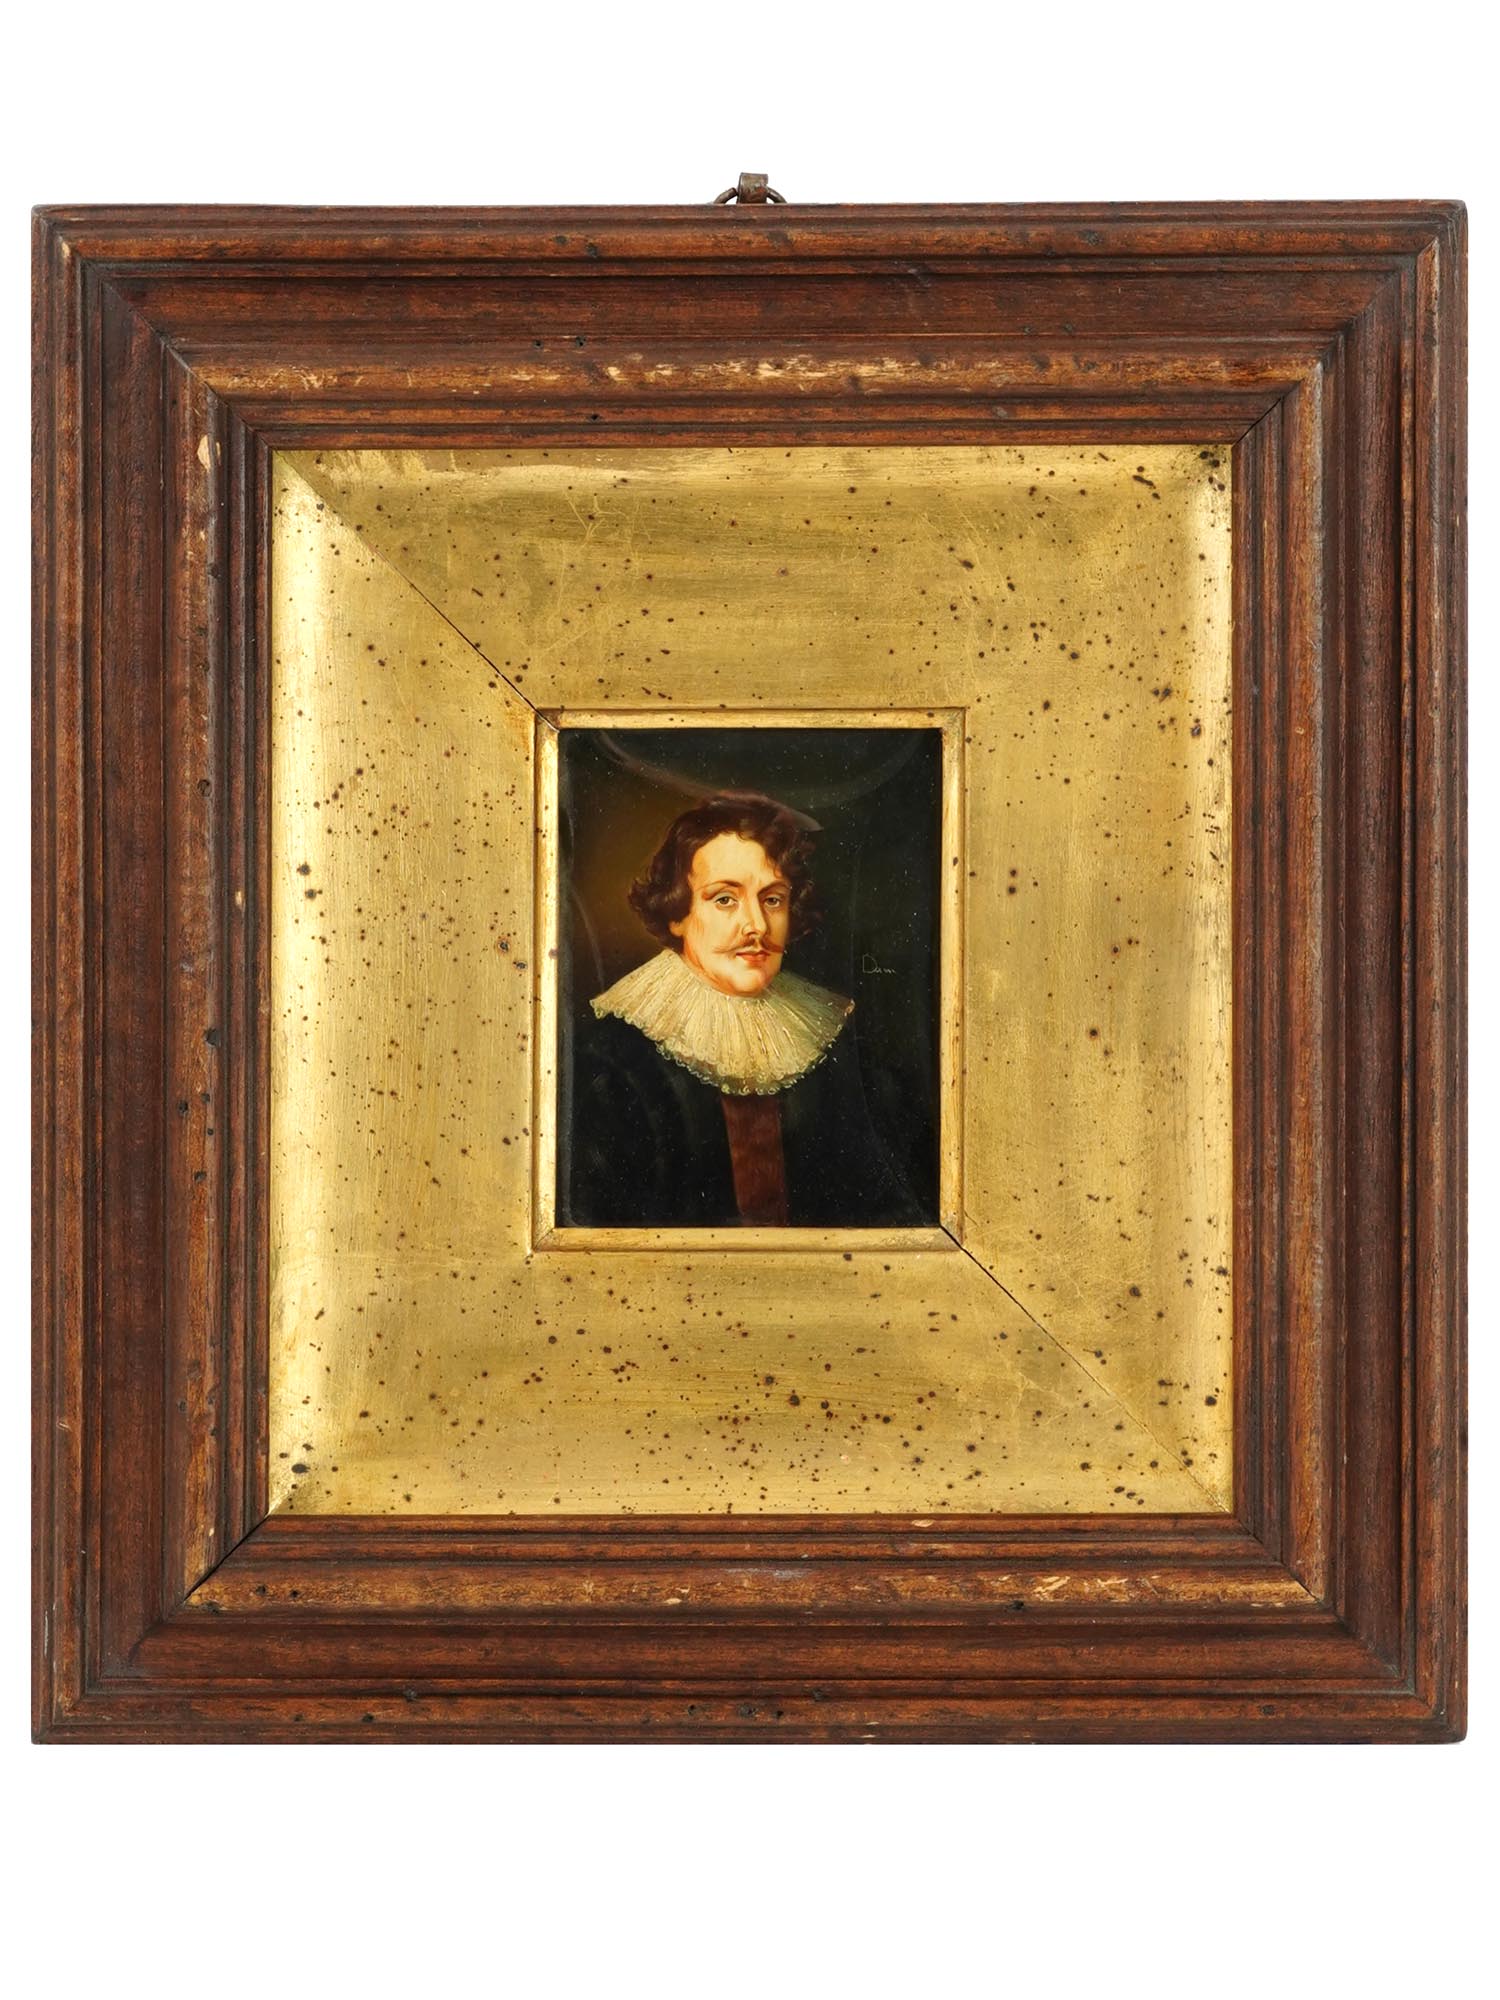 MINIATURE PORTRAIT PAINTING AFTER ANTHONY VAN DYCK PIC-0